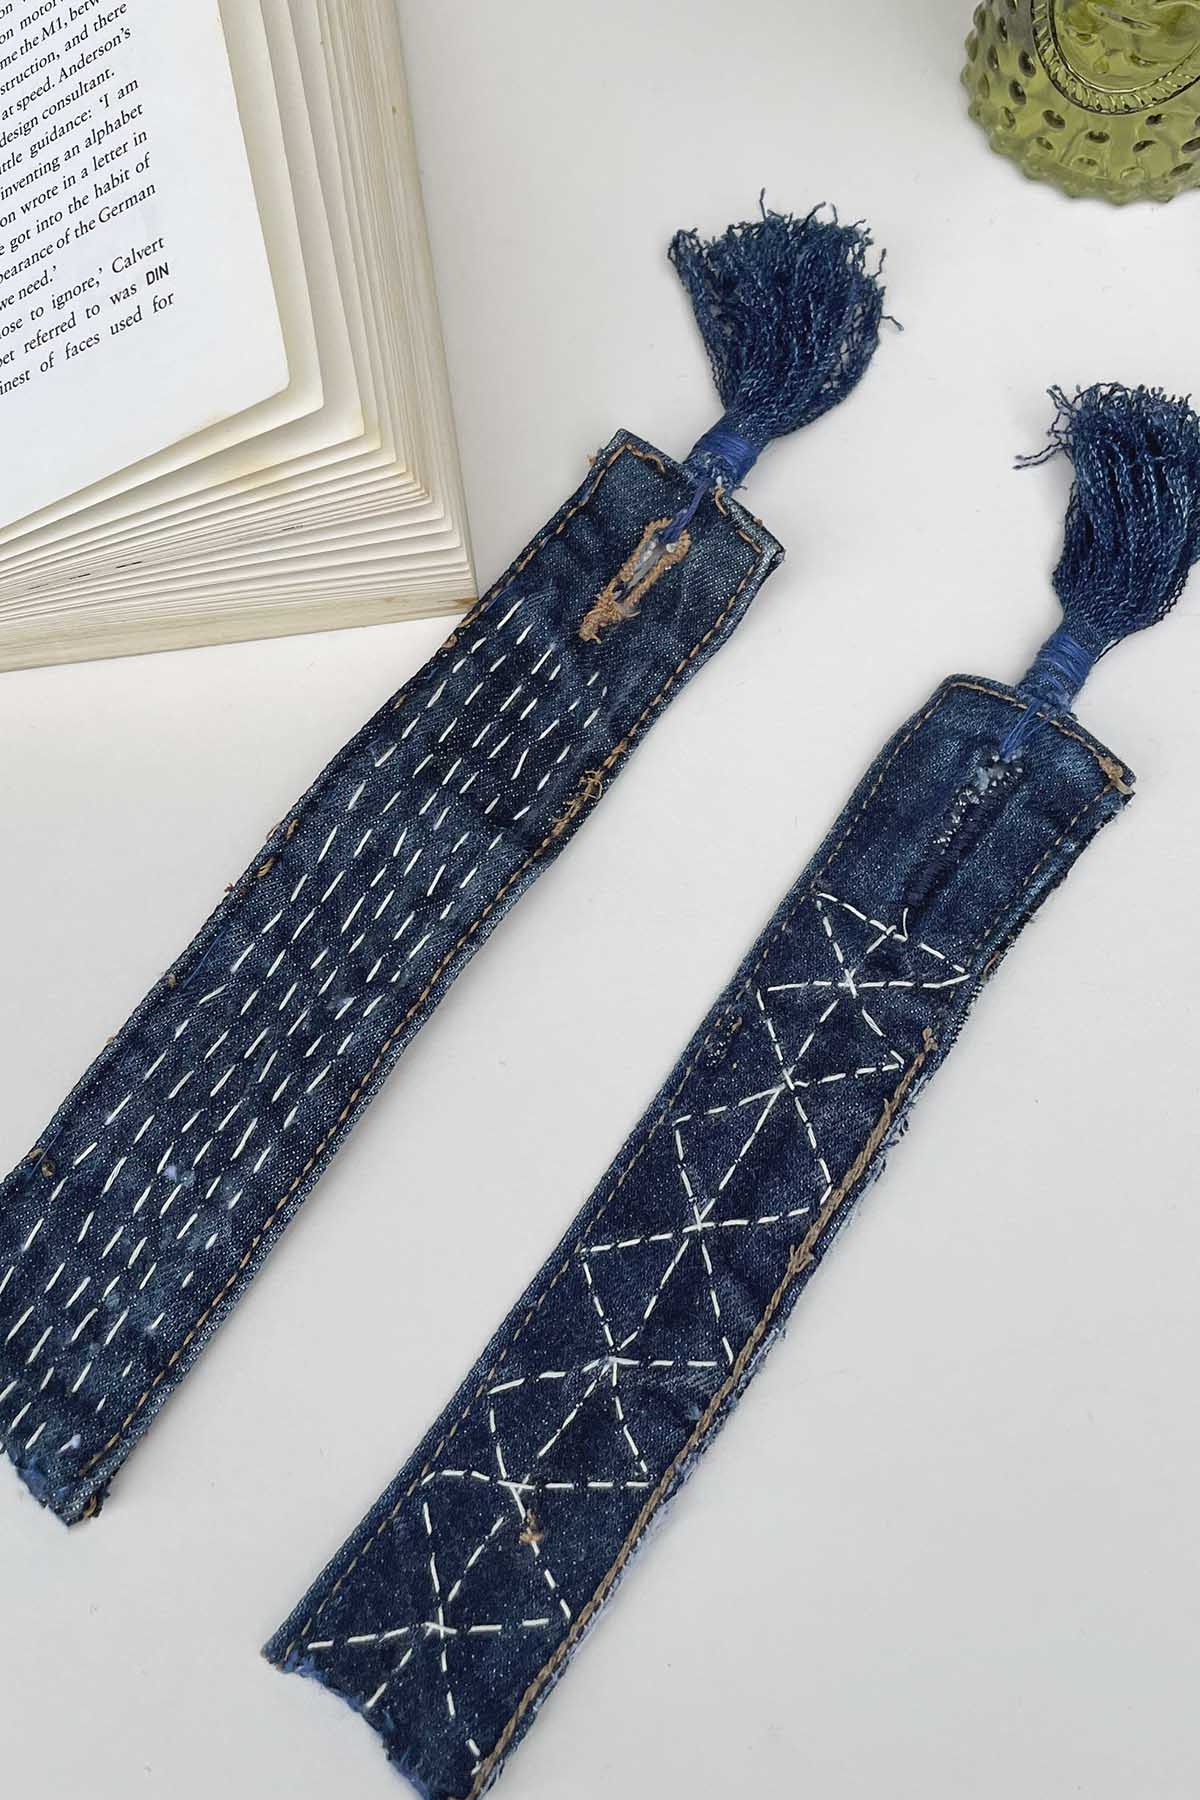 pair of Sashiko embroidered denim bookmarks with book